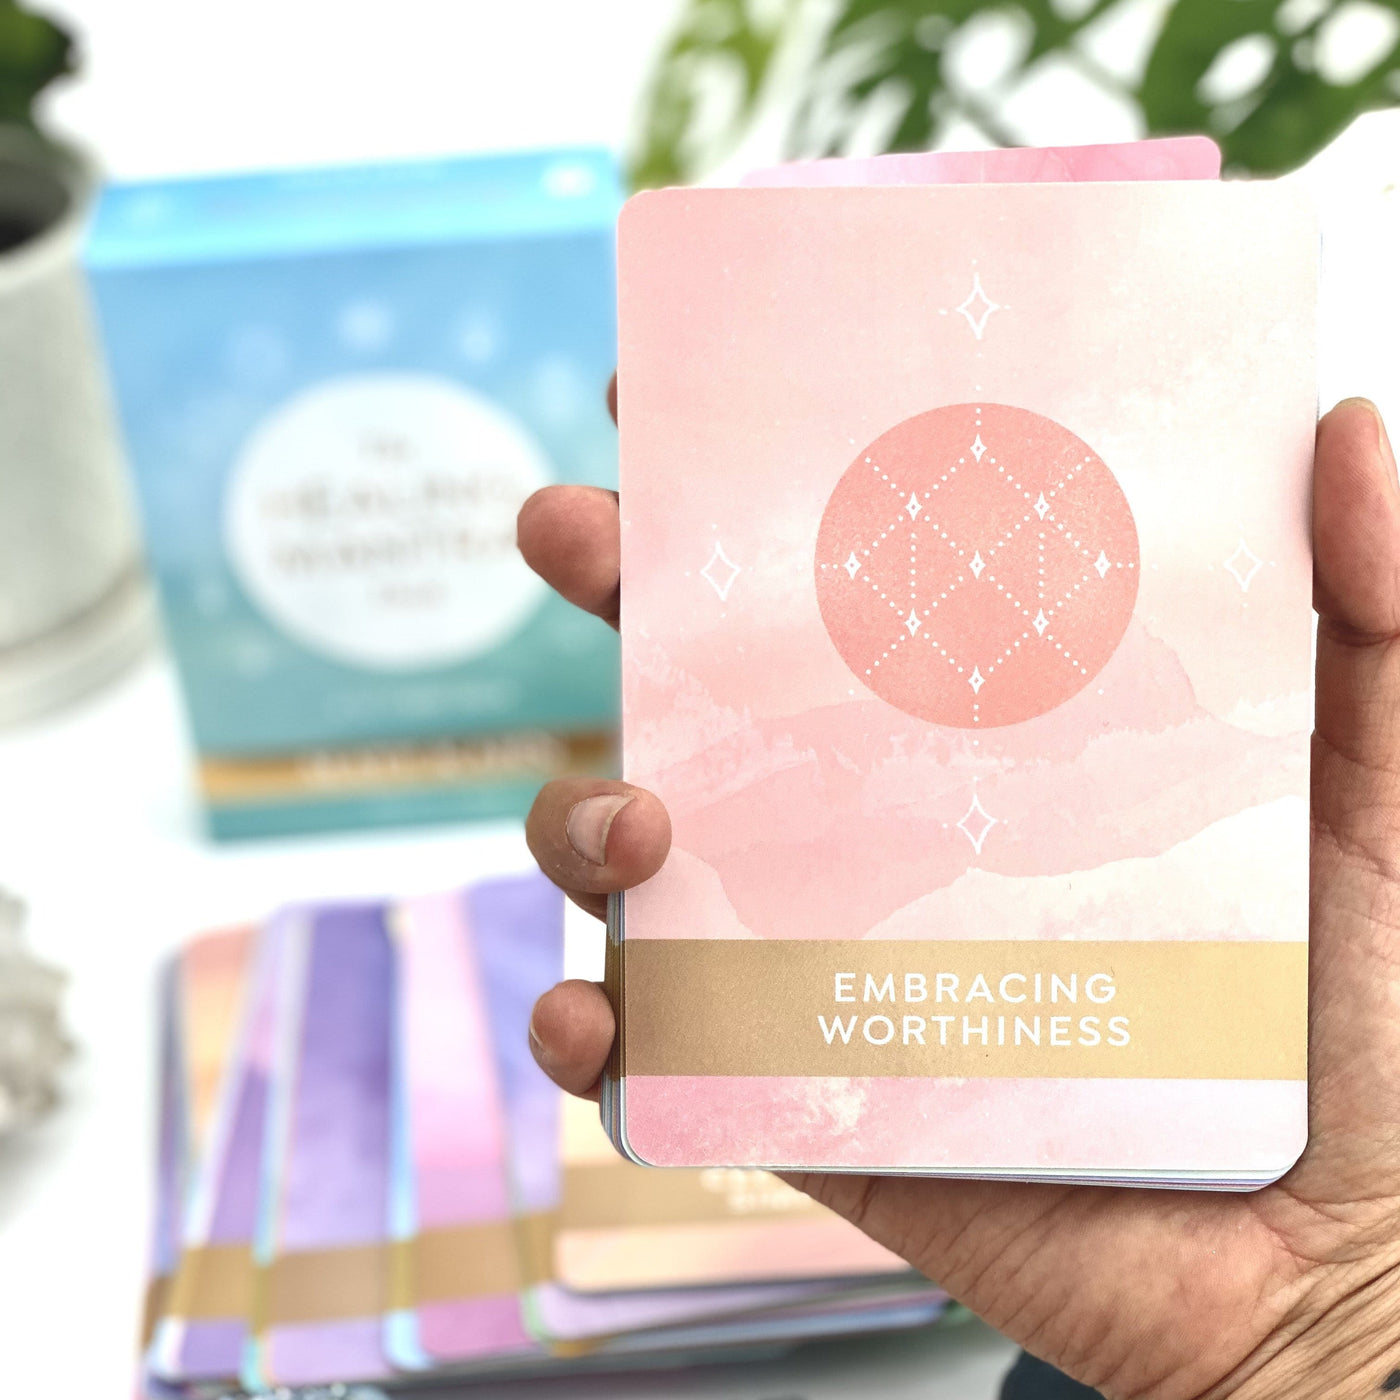 Hand holding one of the cards Embracing worthiness in a pink color 